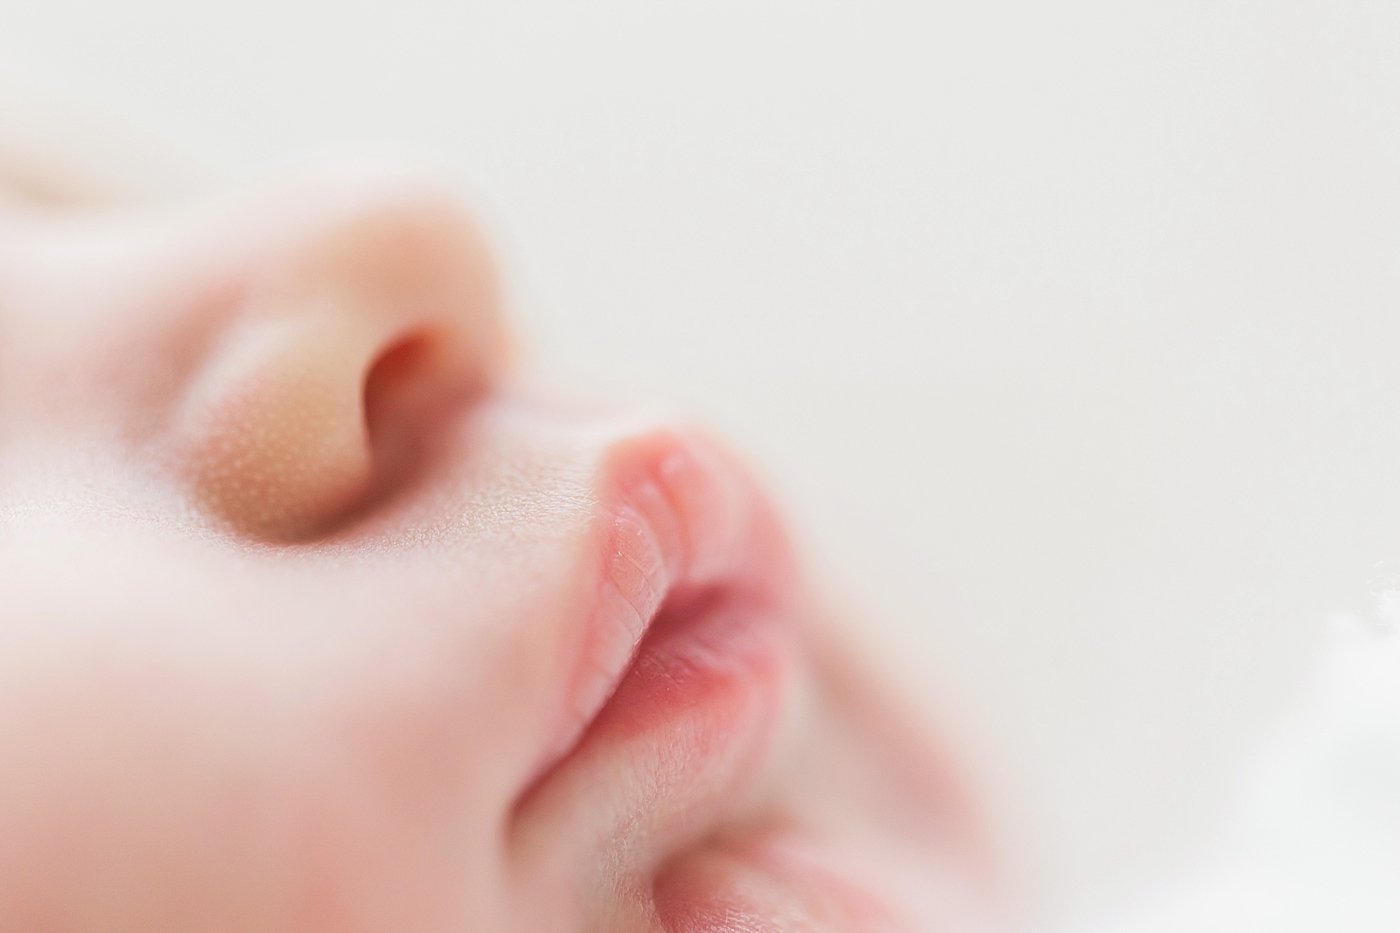 Newborn details of lips. Photo by Fresh Light Photography.